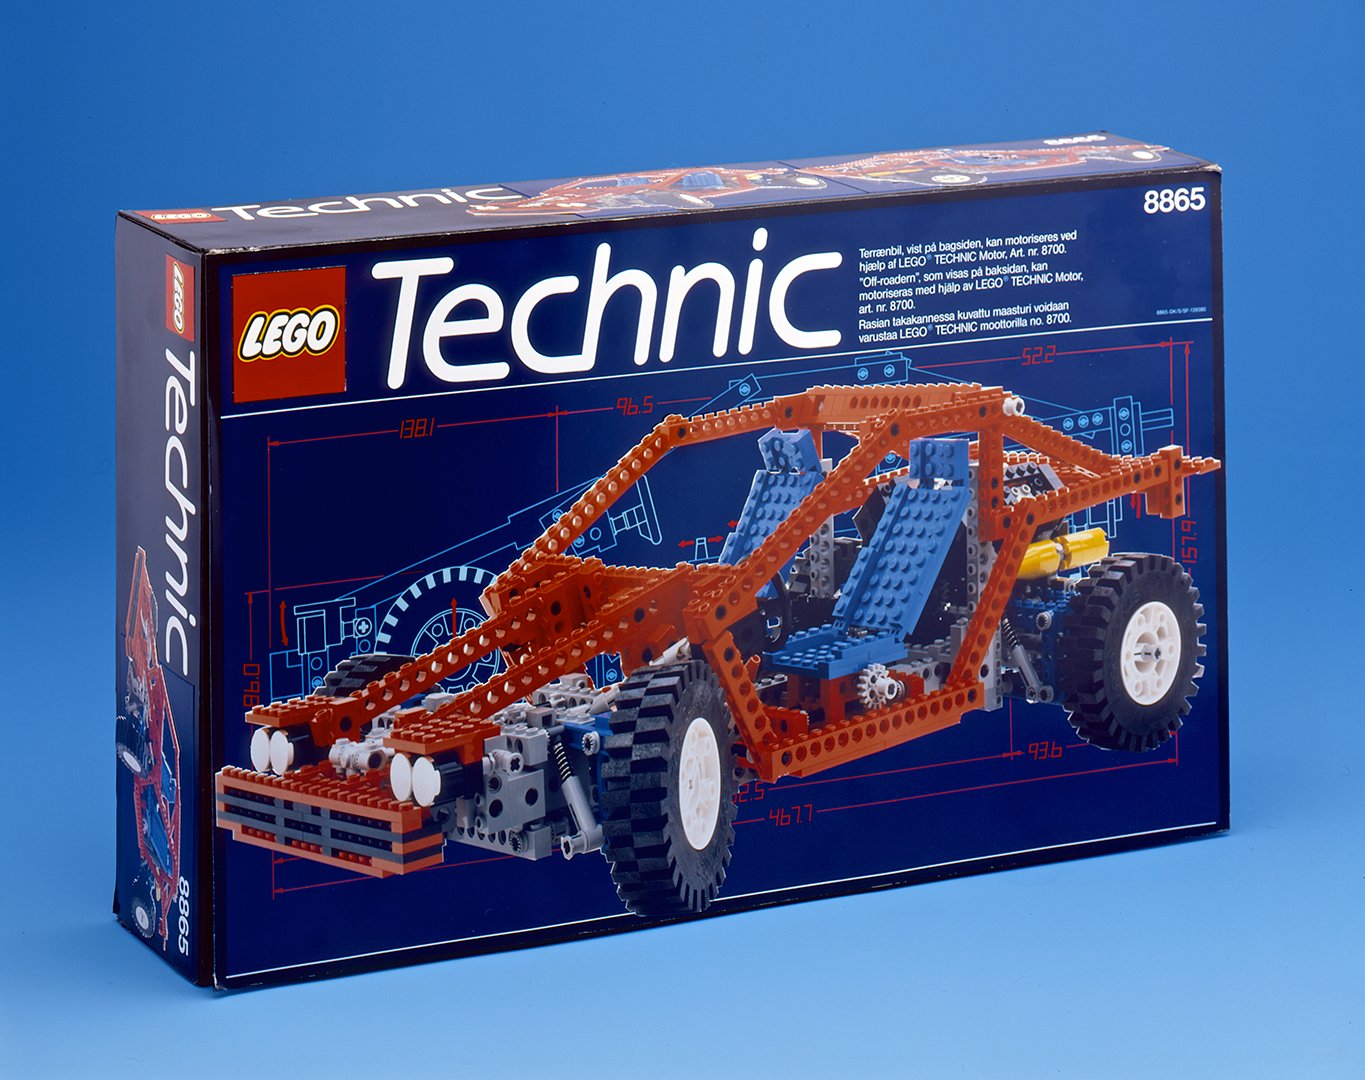 on Twitter: "🚨 THROWBACK ALERT 🚨 Check out these early LEGO Technic cars! 🌟 BONUS FACT🌟 8865 was the first to feature a body for the chassis. #LEGOMastersFOX https://t.co/6nwLvO9JfL" / Twitter